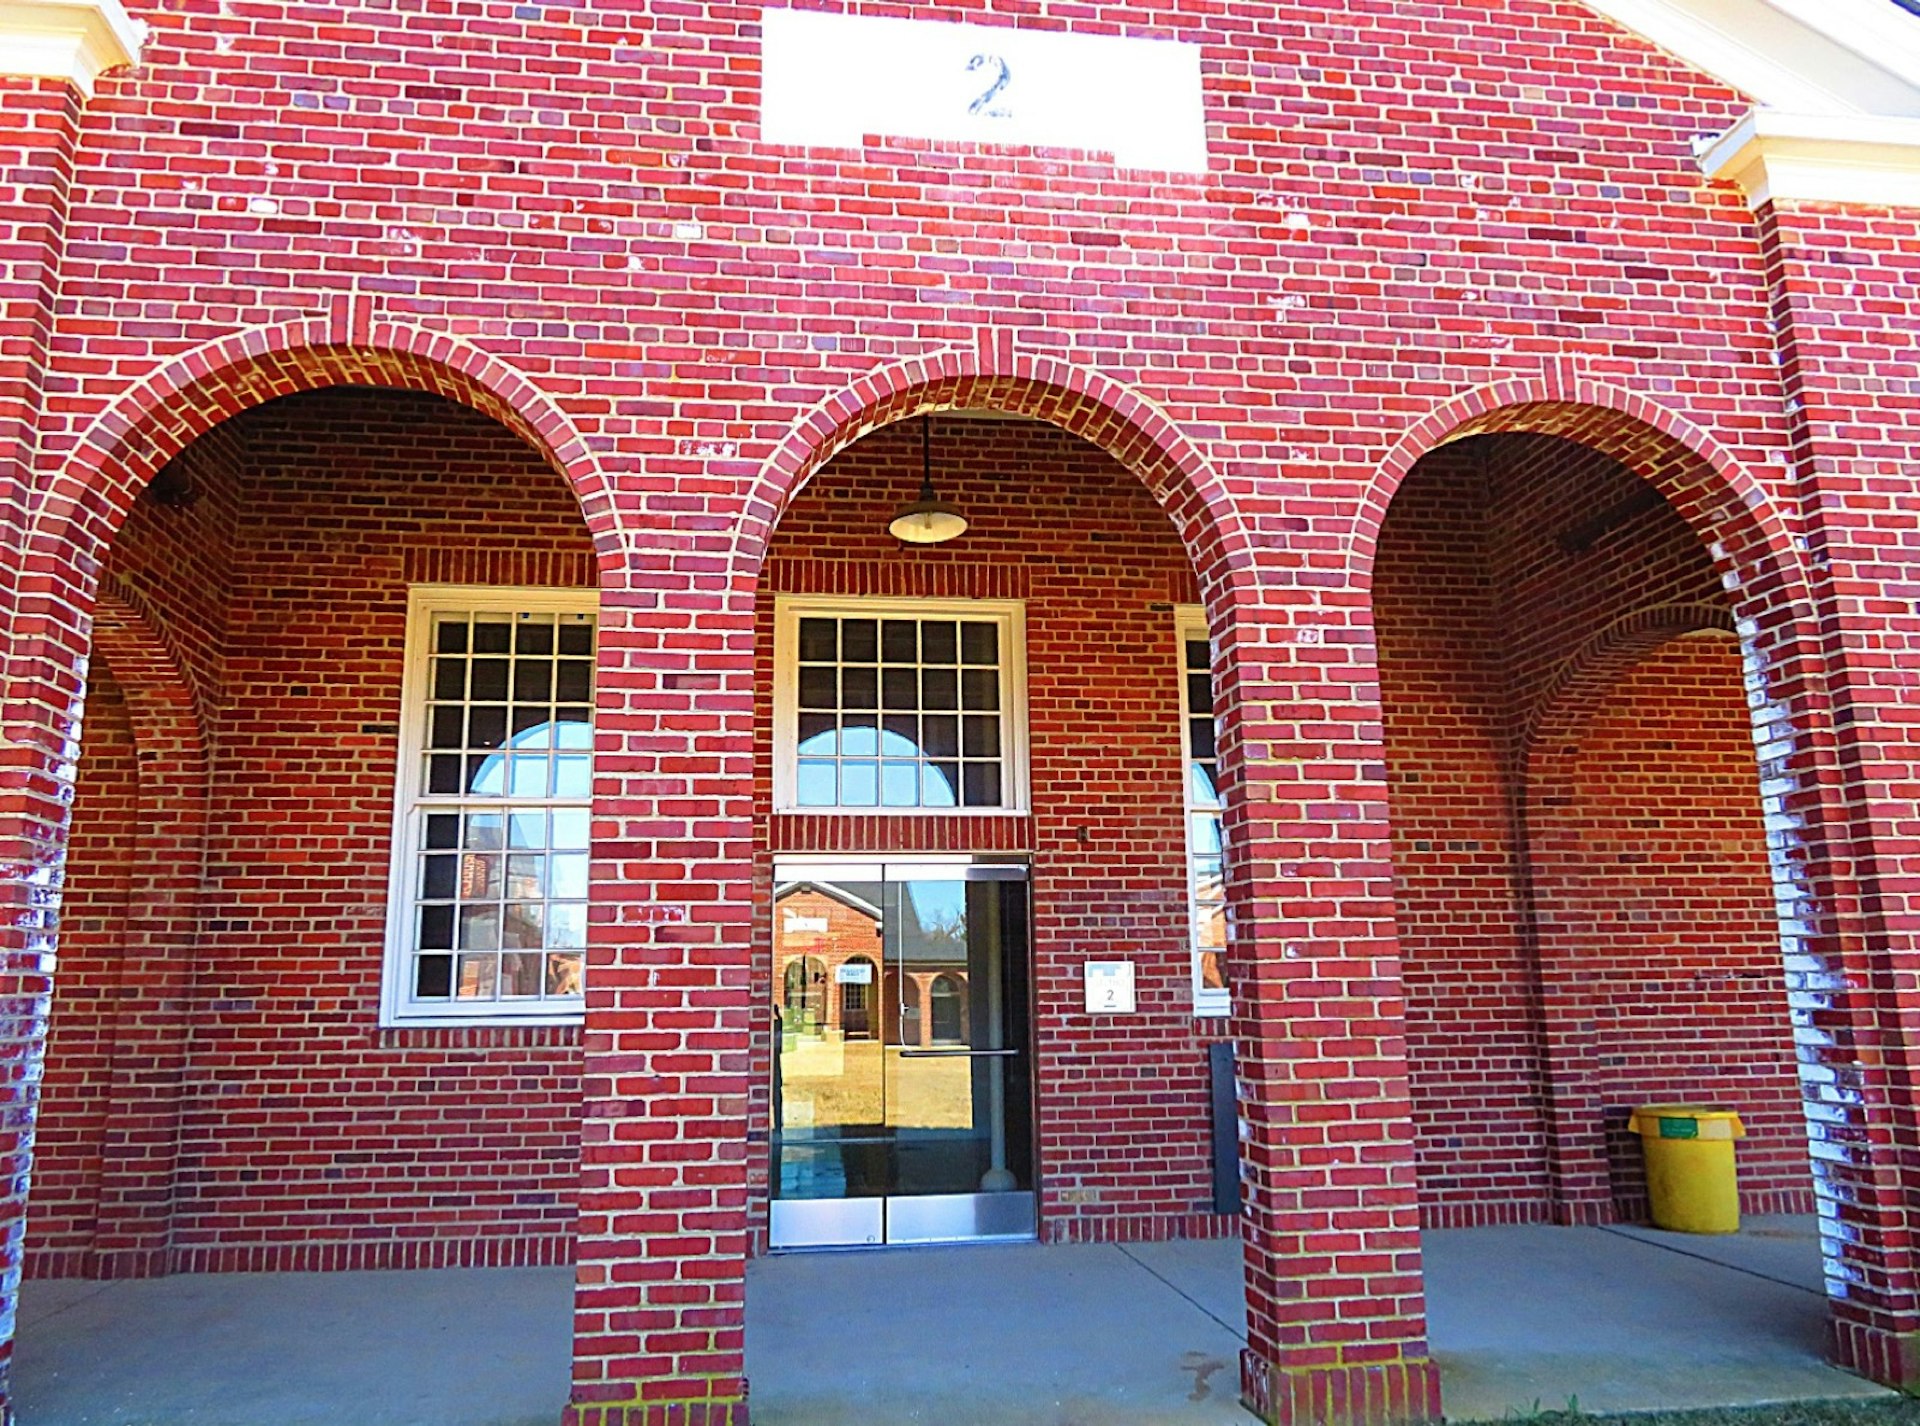 Red Brick arches mark an old prison which has been turned into a museum